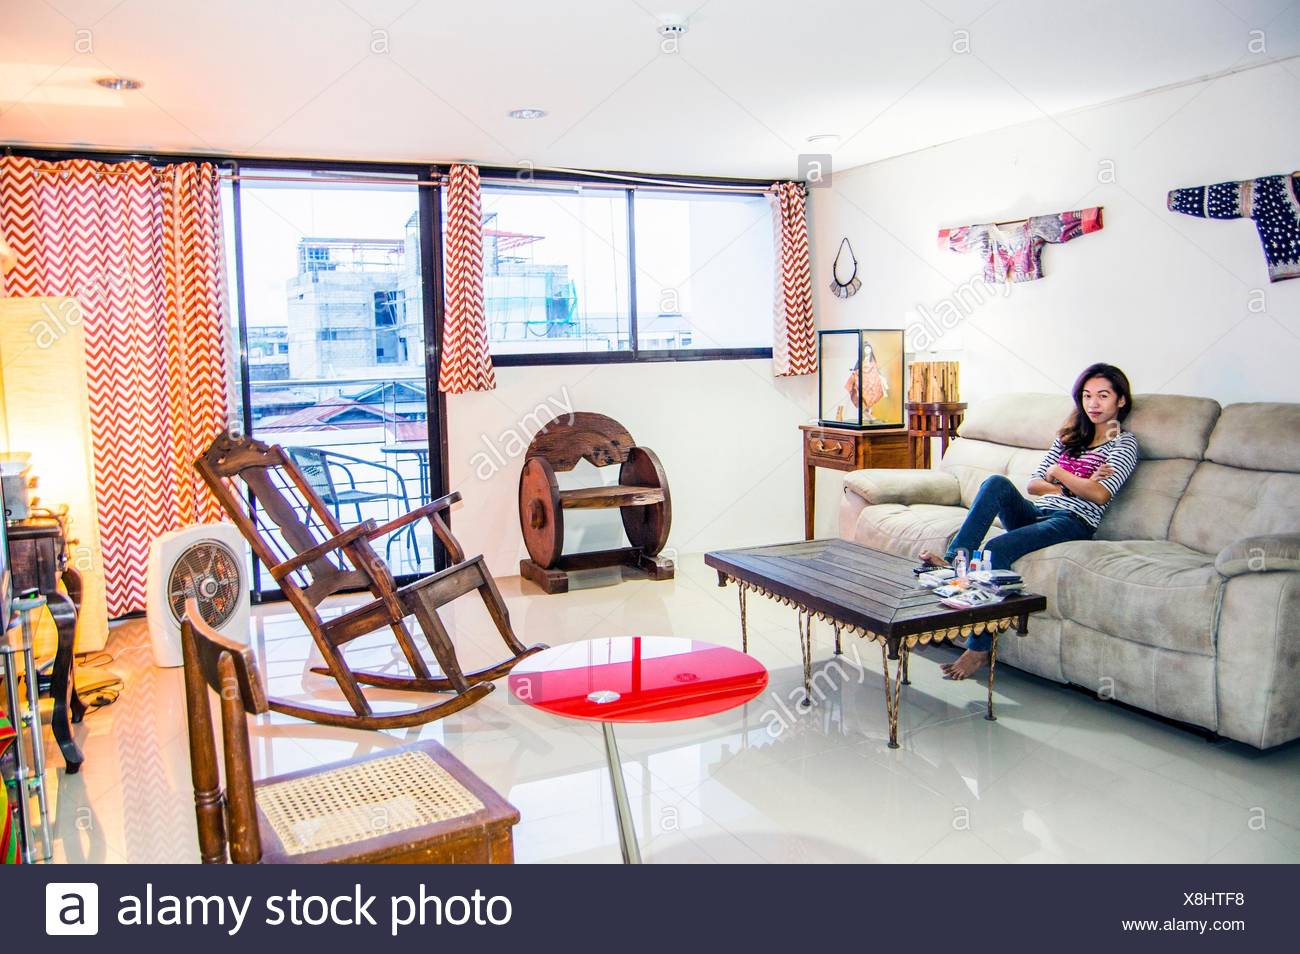 Living Room Interior With Antique And Modern Furnishings And Decor Downtown Cebu Philippines Stock Photo Alamy,Design And Control Of Concrete Mixtures